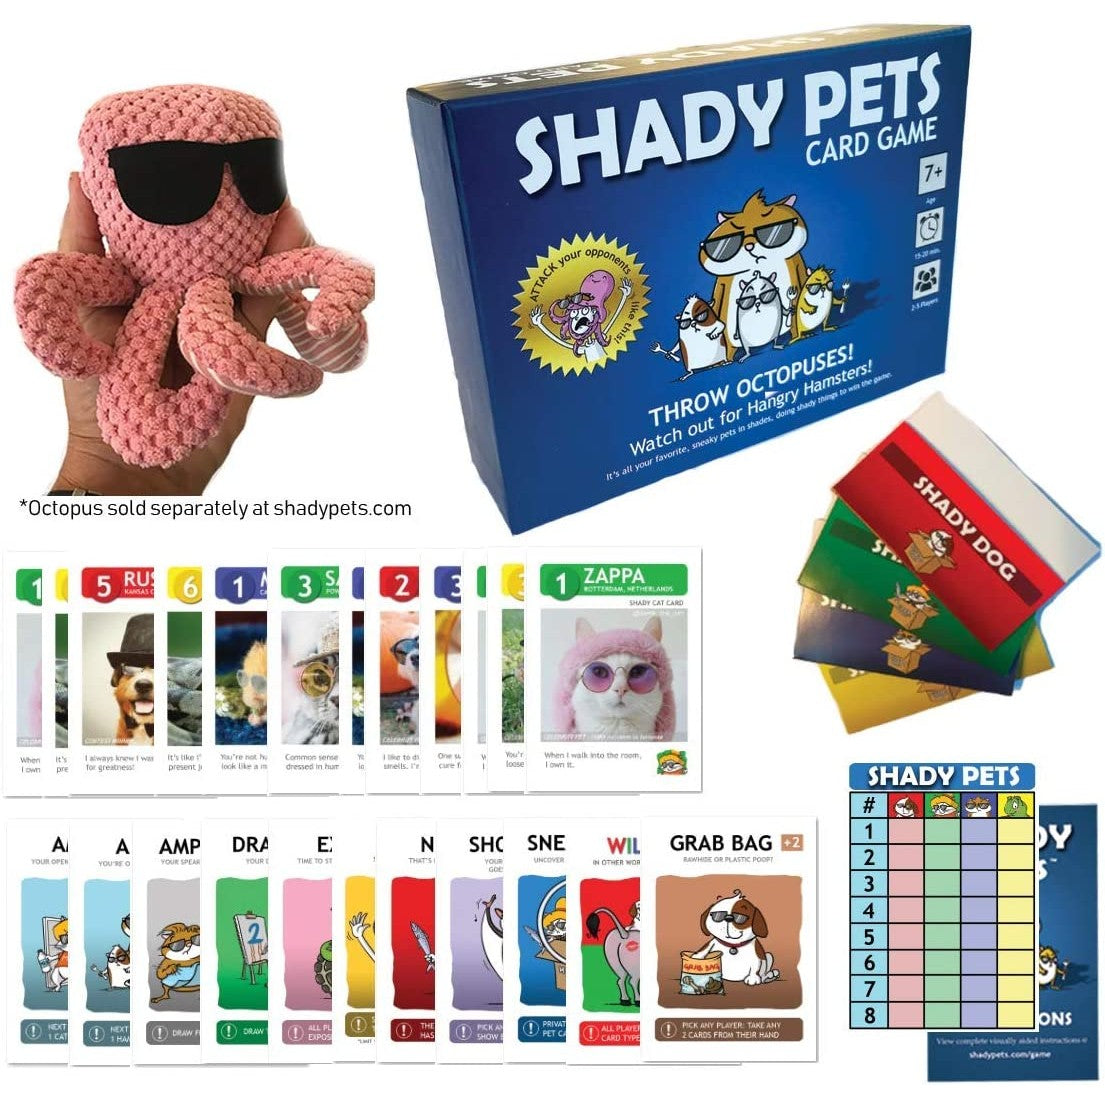 Shady pets card game.